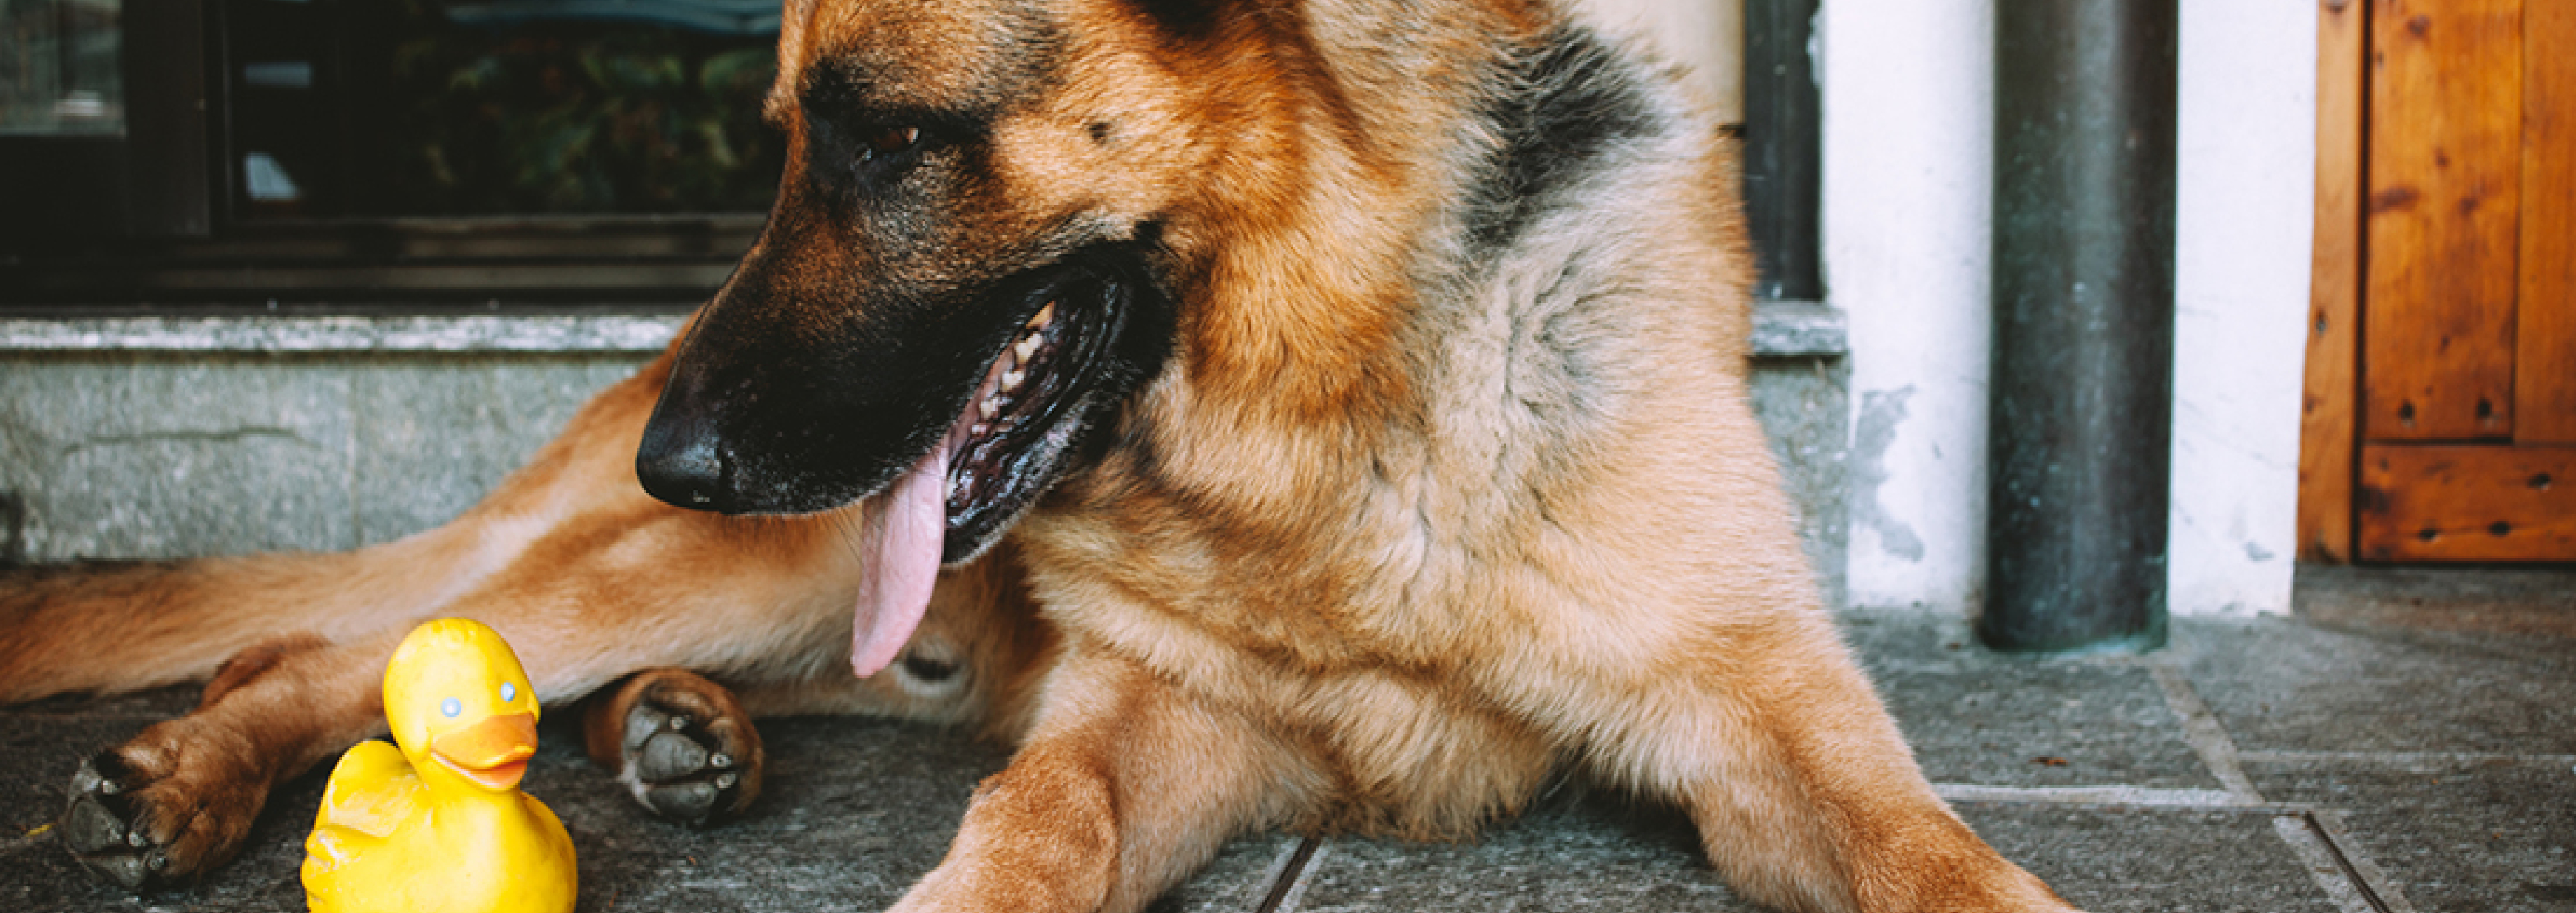 Home Alone! Keeping Your German Shepherd Entertained | PEDIGREE®